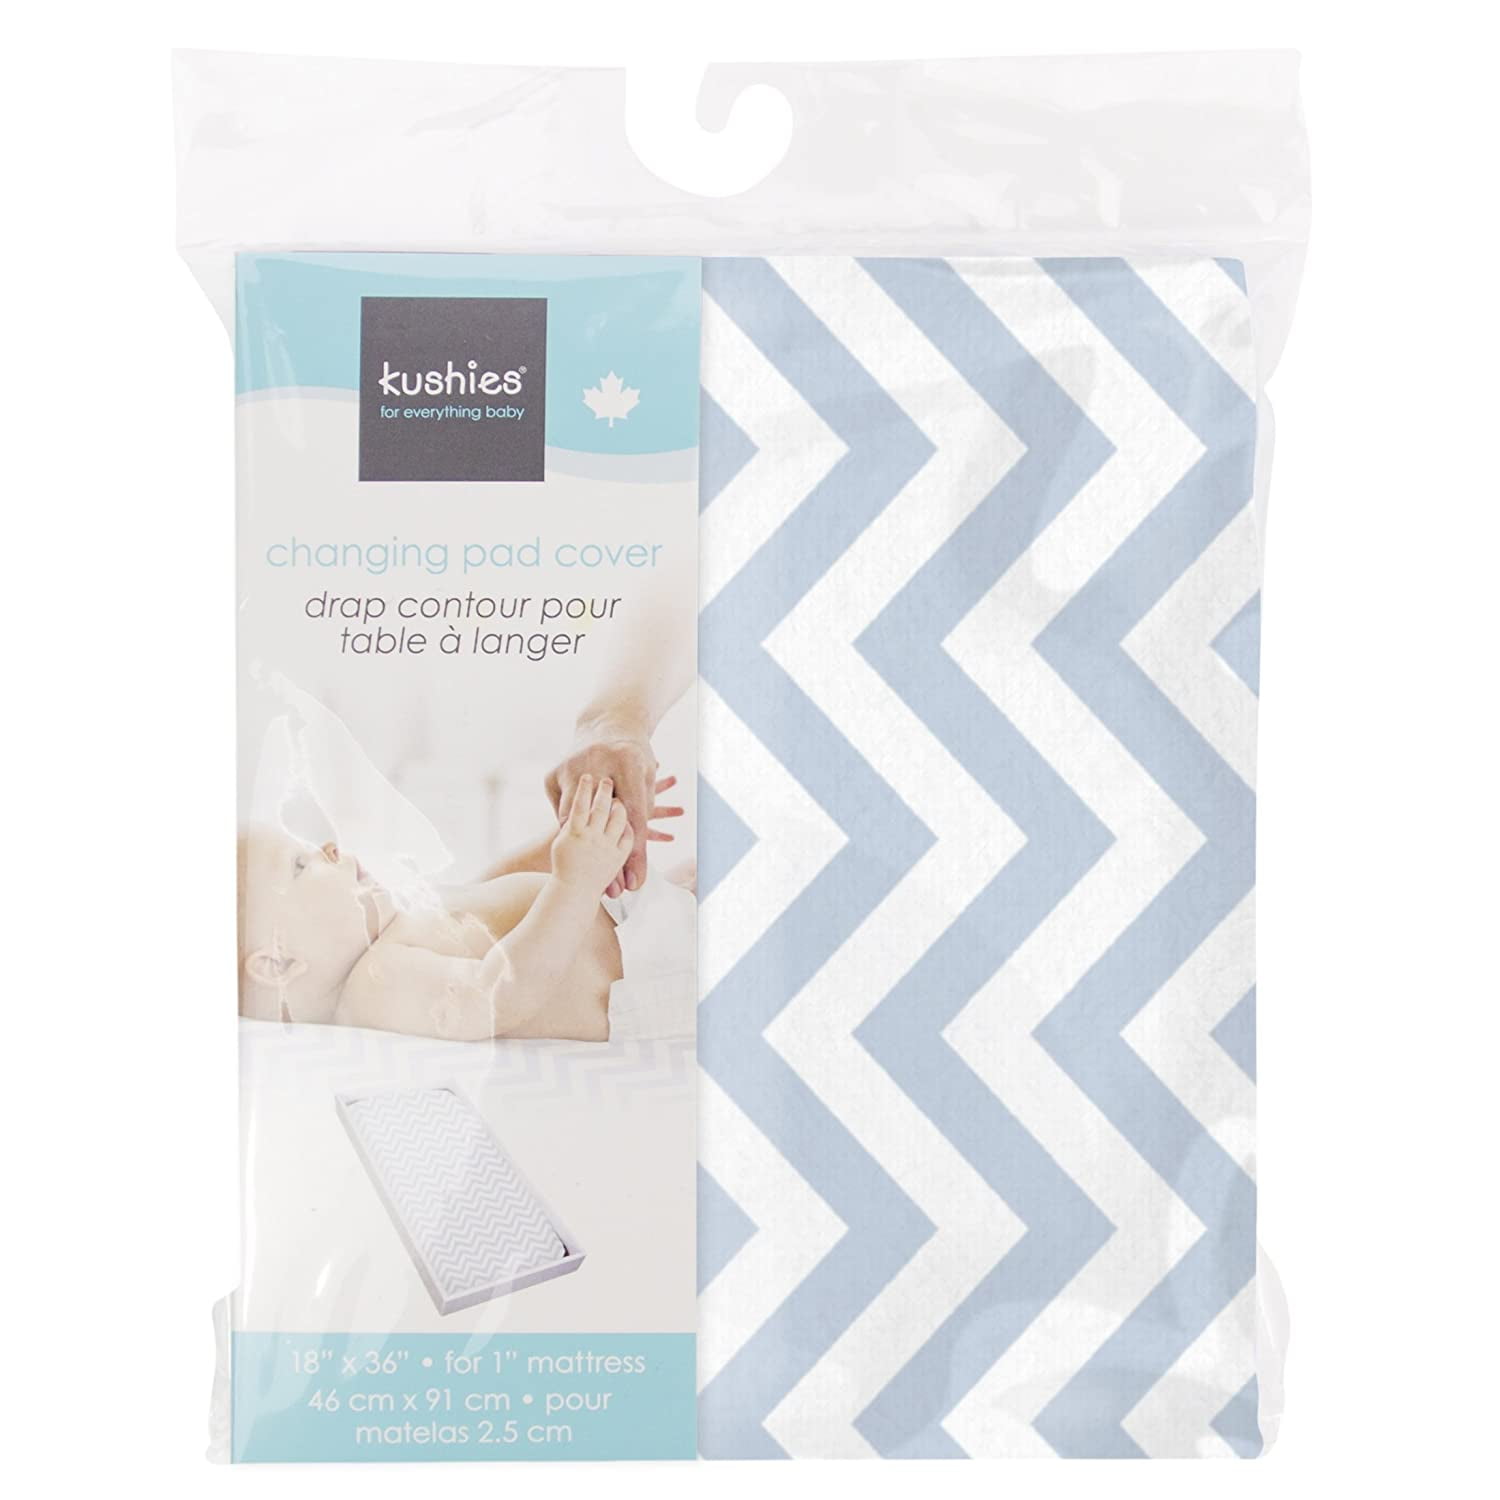 Made in Canada Kushies Baby Contour Change Pad Cover Ultra Soft 100% Cotton Flannel Blue Chevron